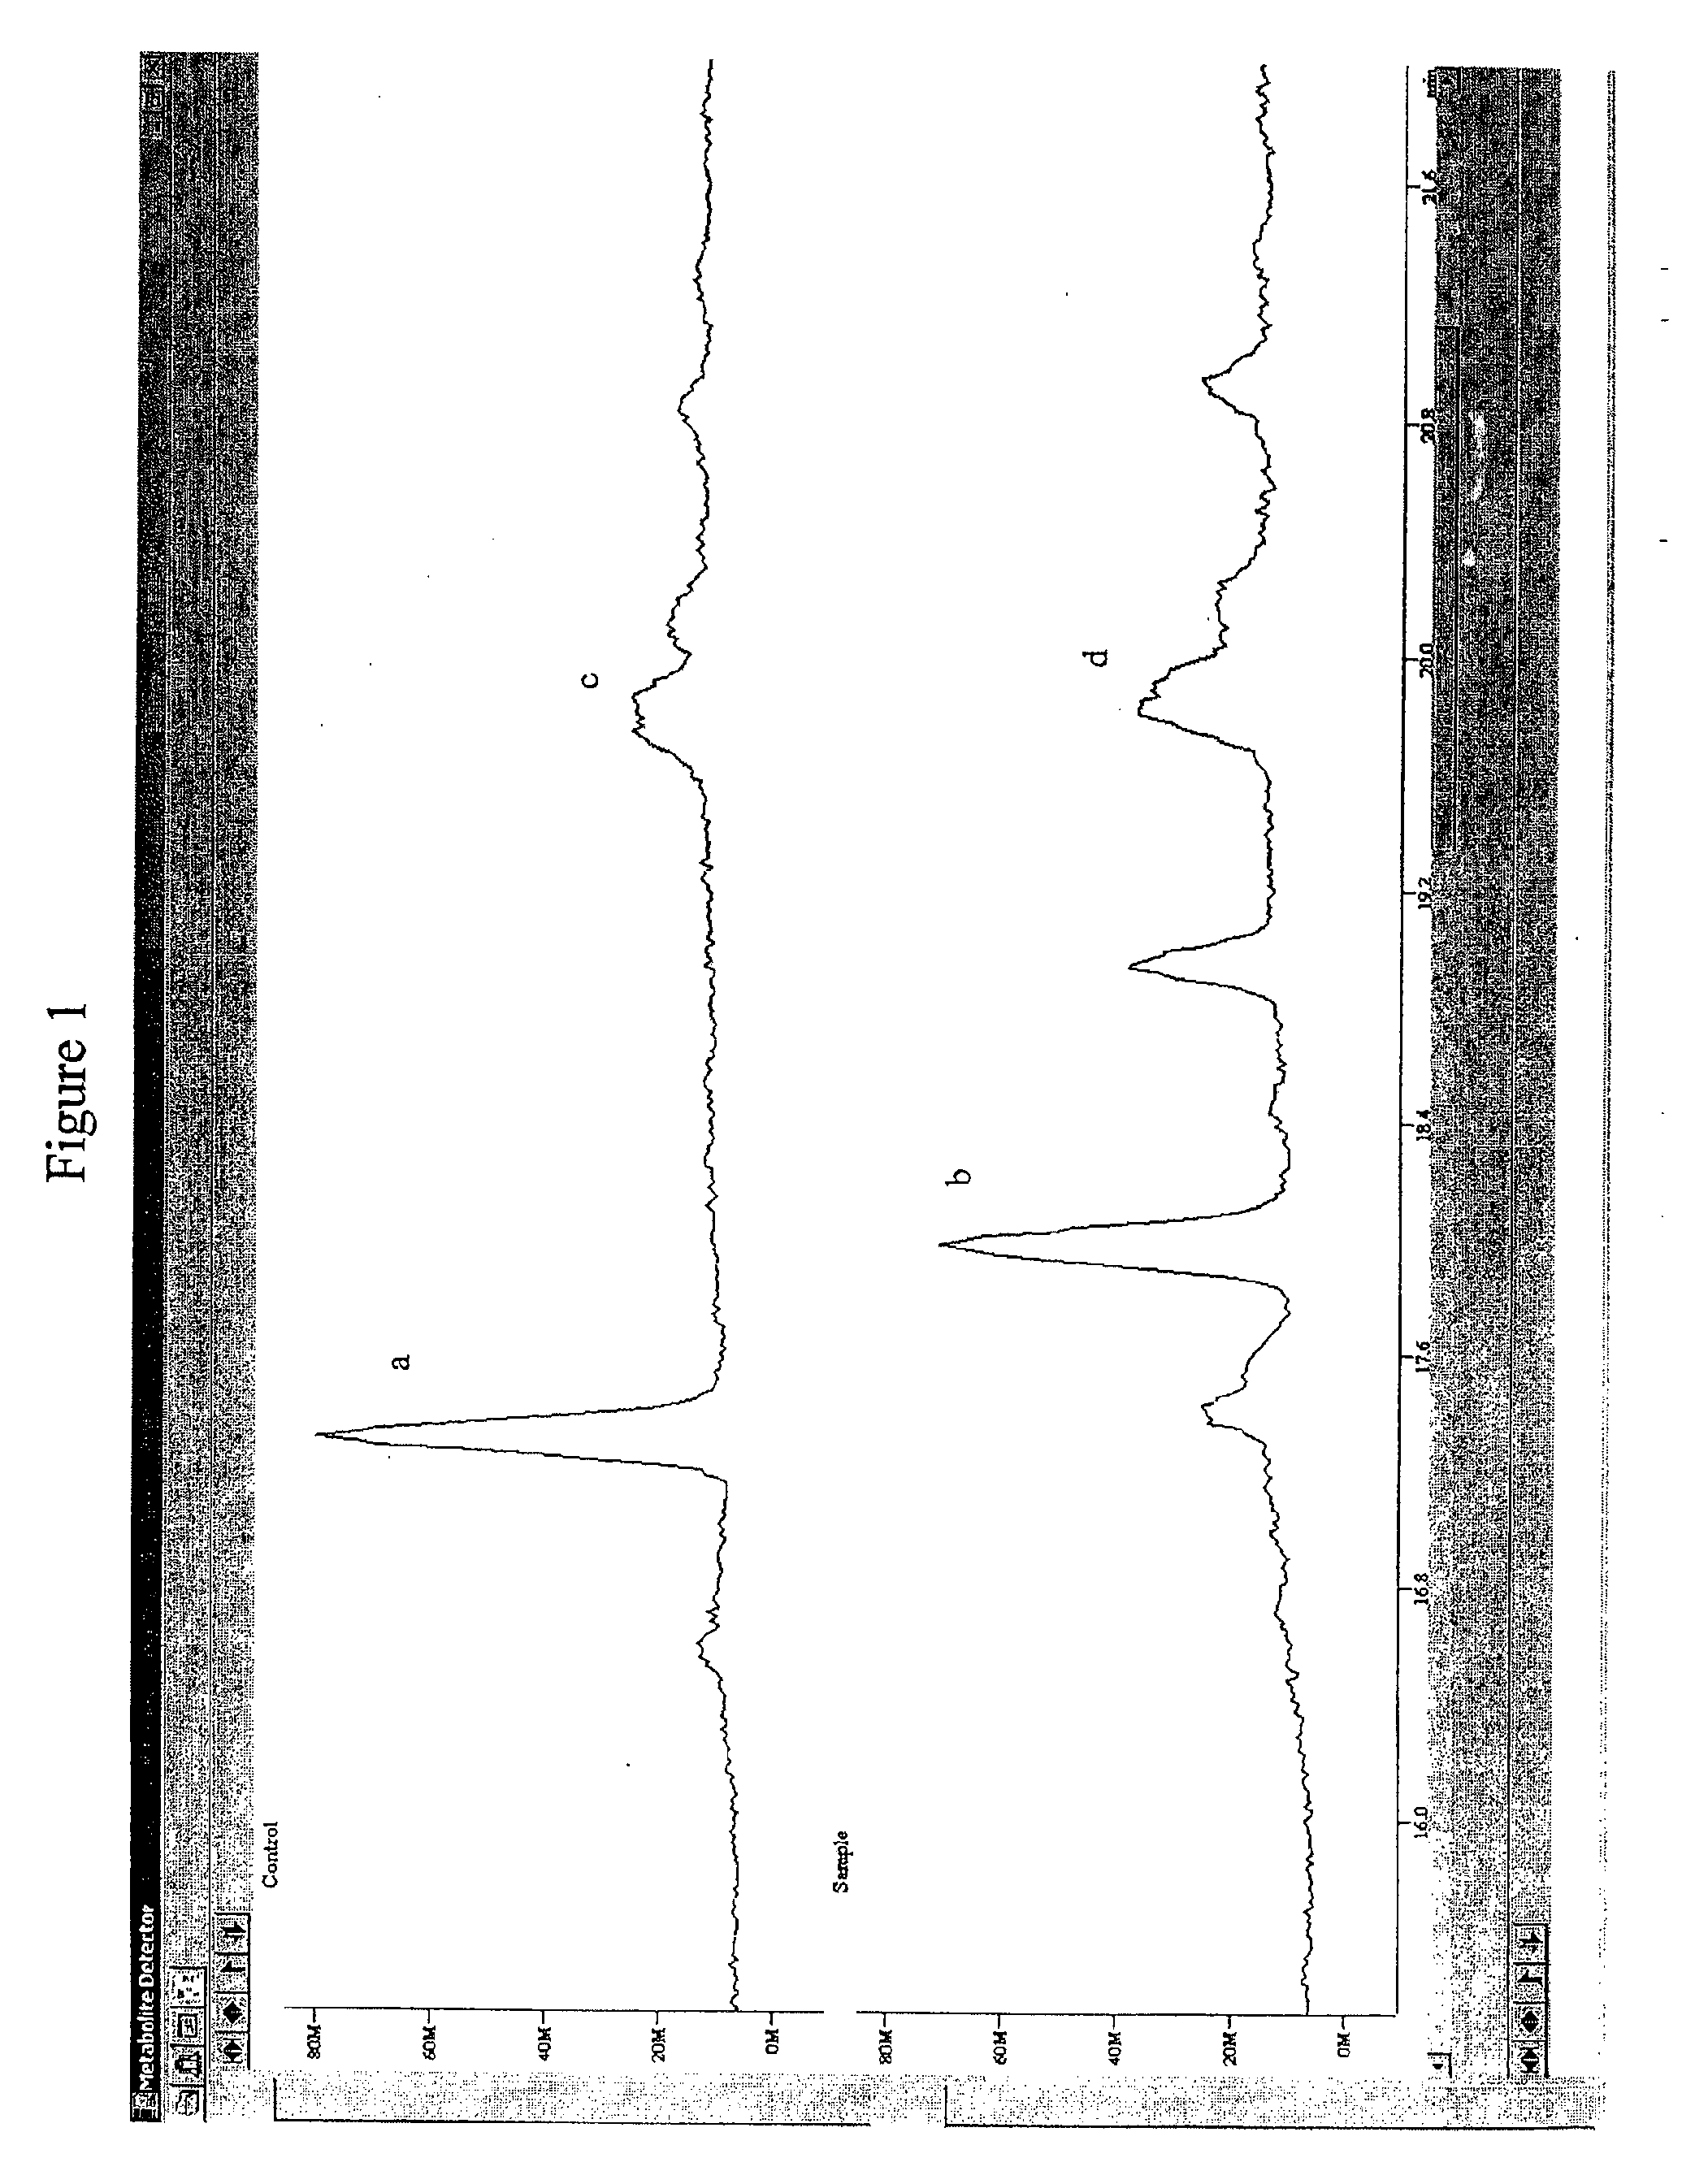 System and Method for Feature Alignment